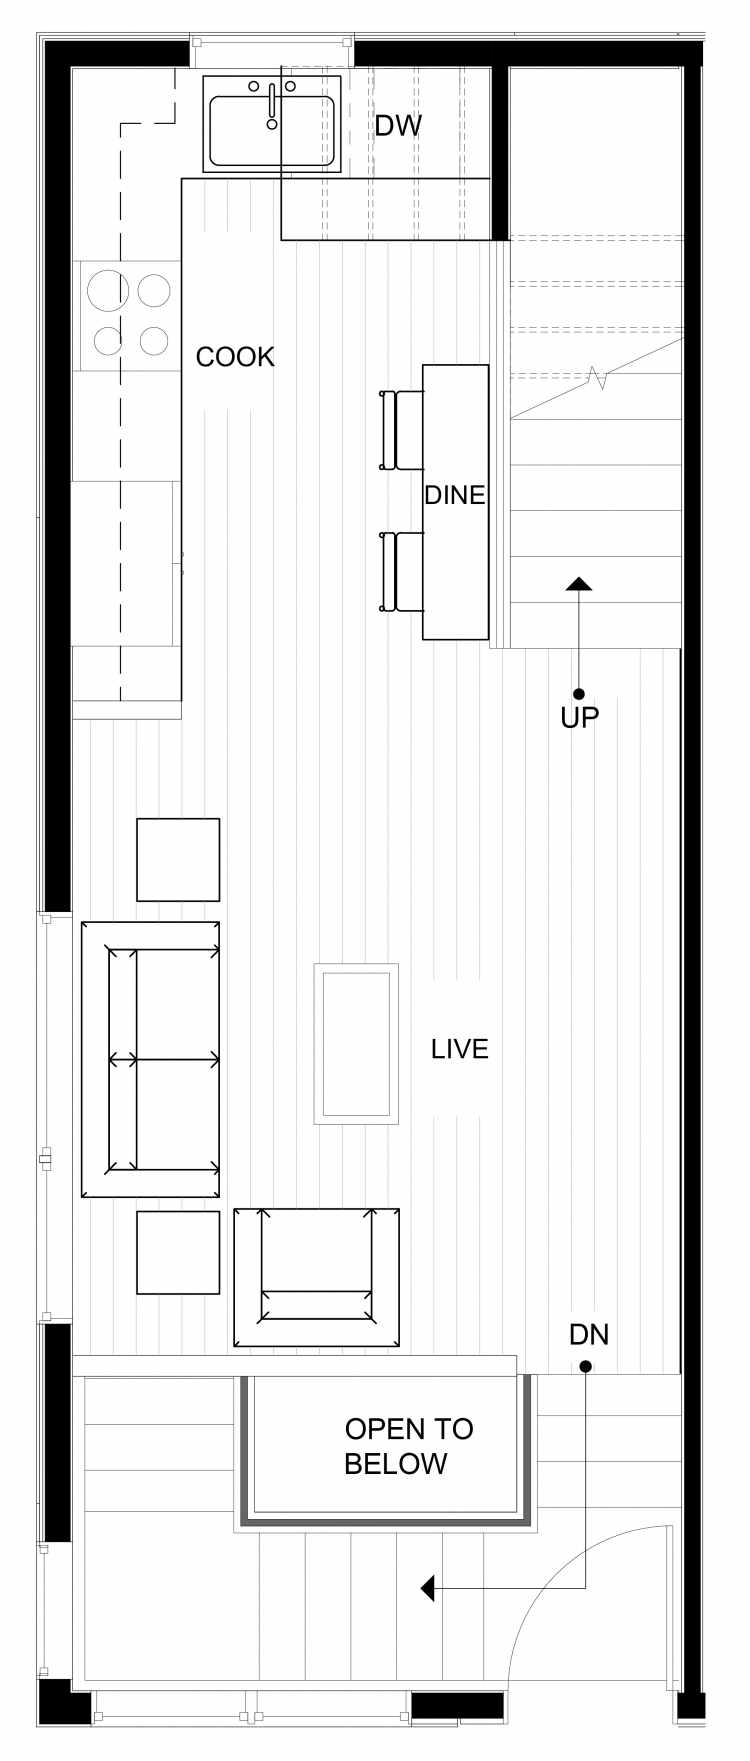 Second Floor Plan of 1544 15th Ave E, One of the Grandview Townhomes in Capitol Hill